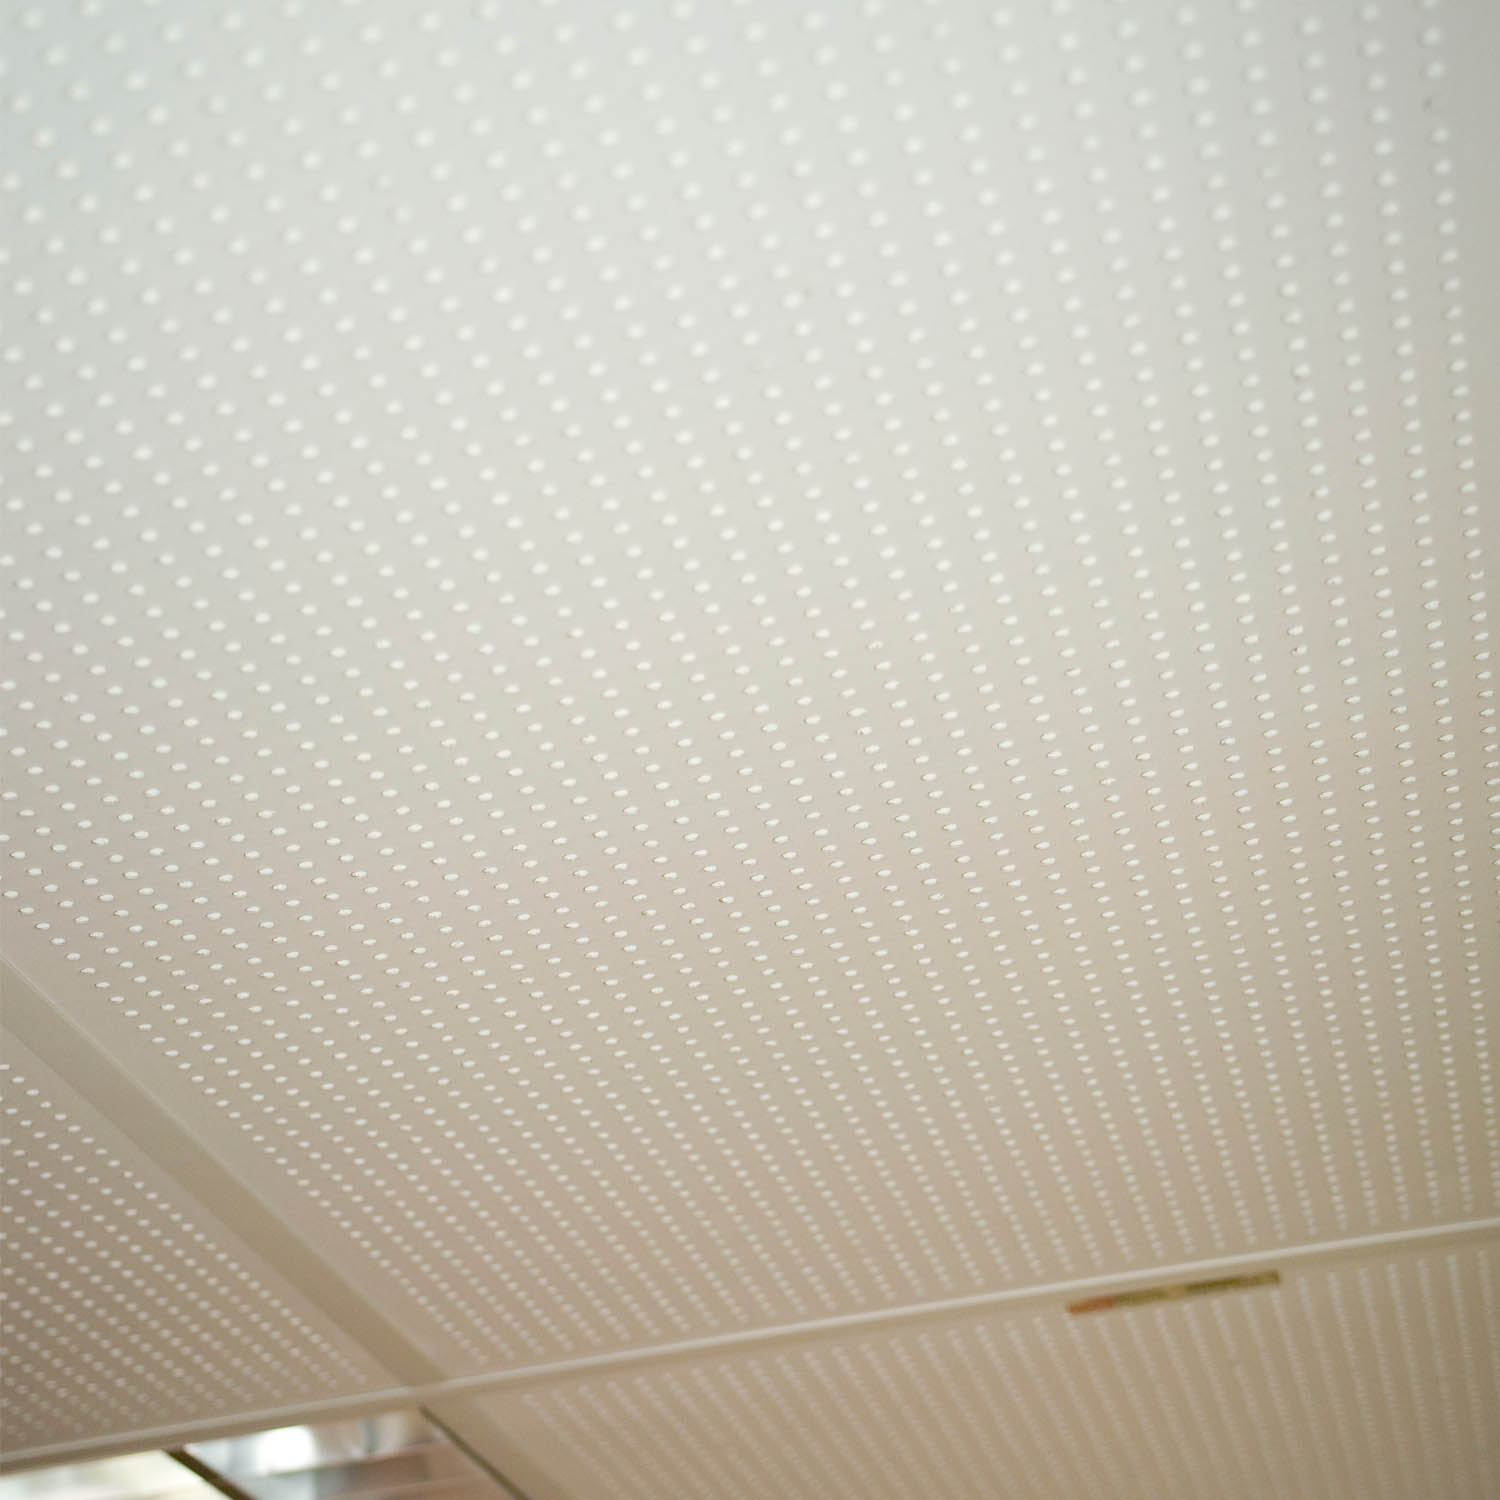 Gyprock® Perforated Ceiling Tiles